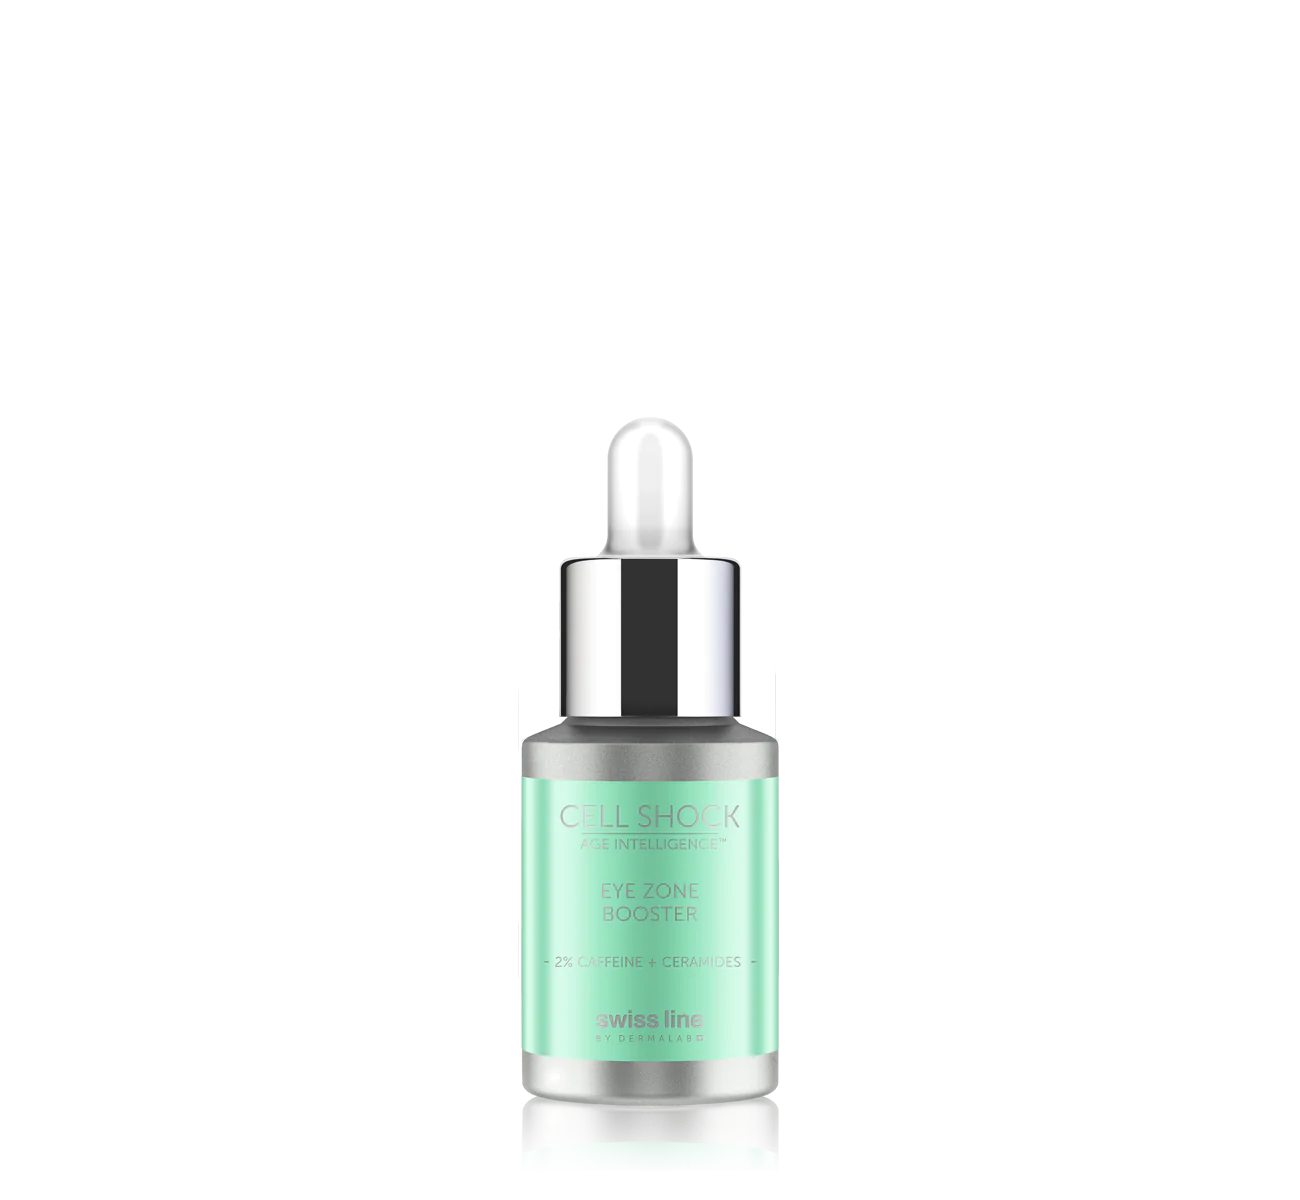 Swiss Line Cell Eye Zone Booster serum with dropper product image